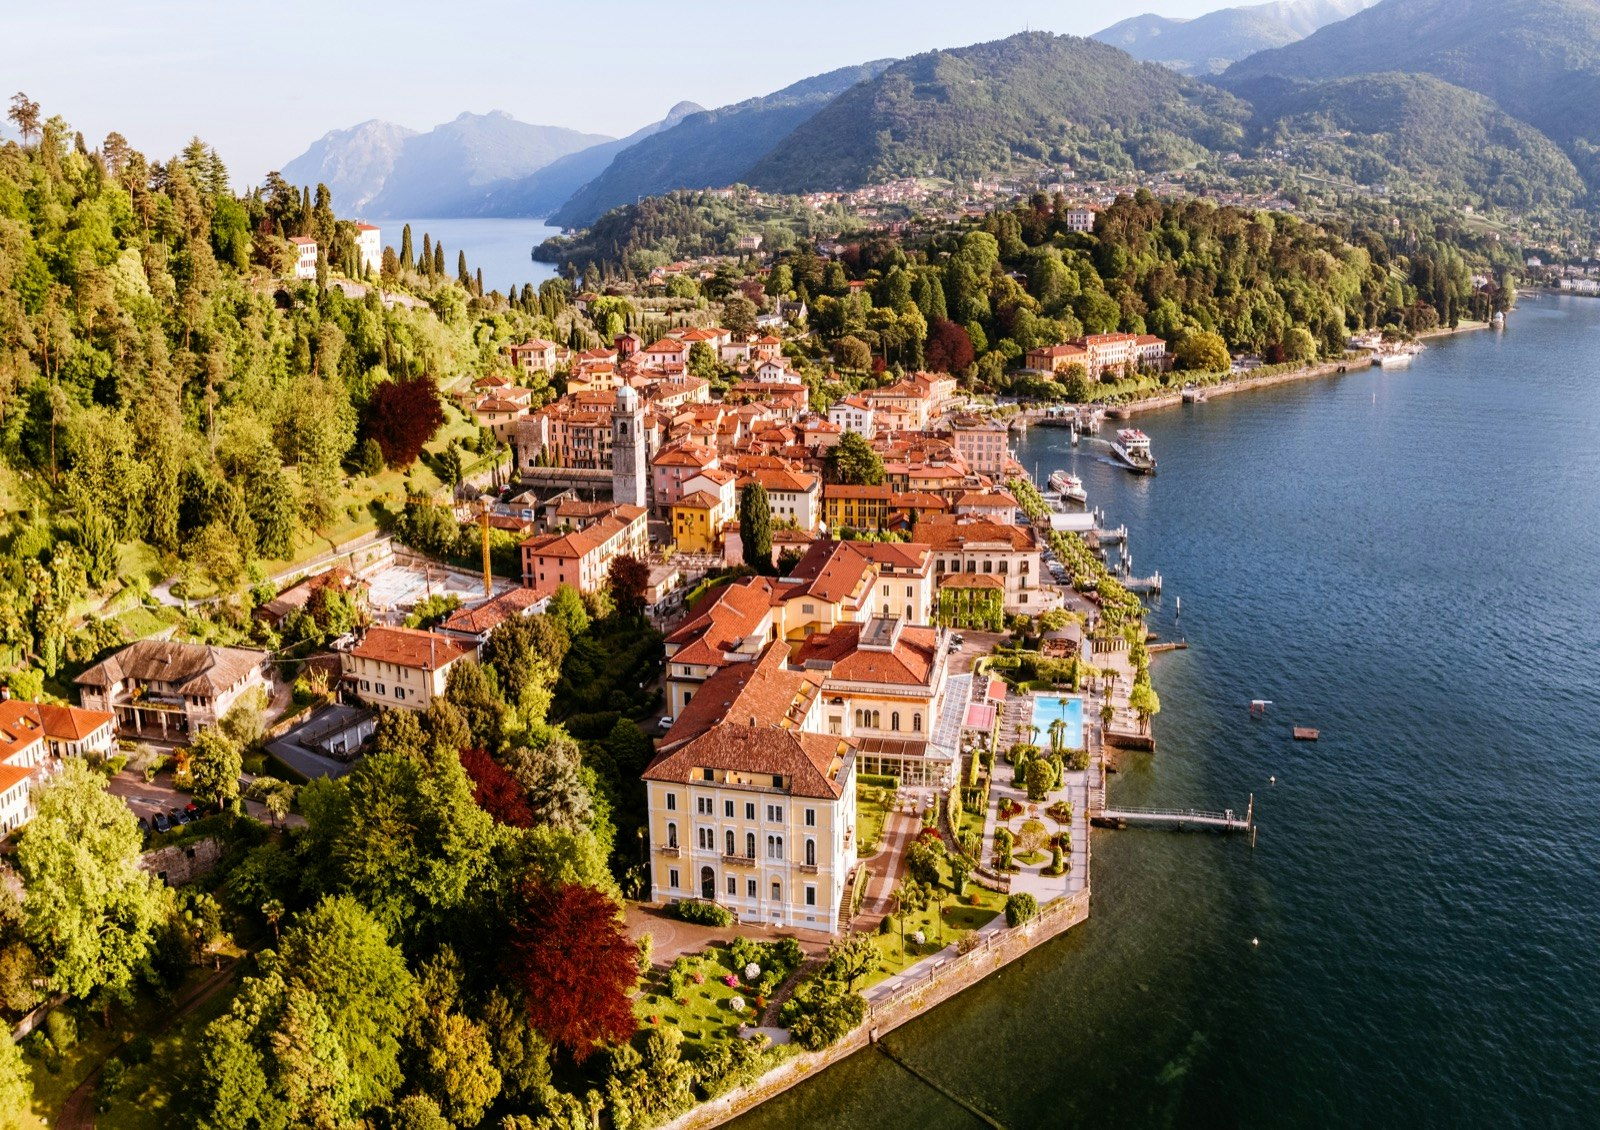 Bellagio town on Lake Como seen from above